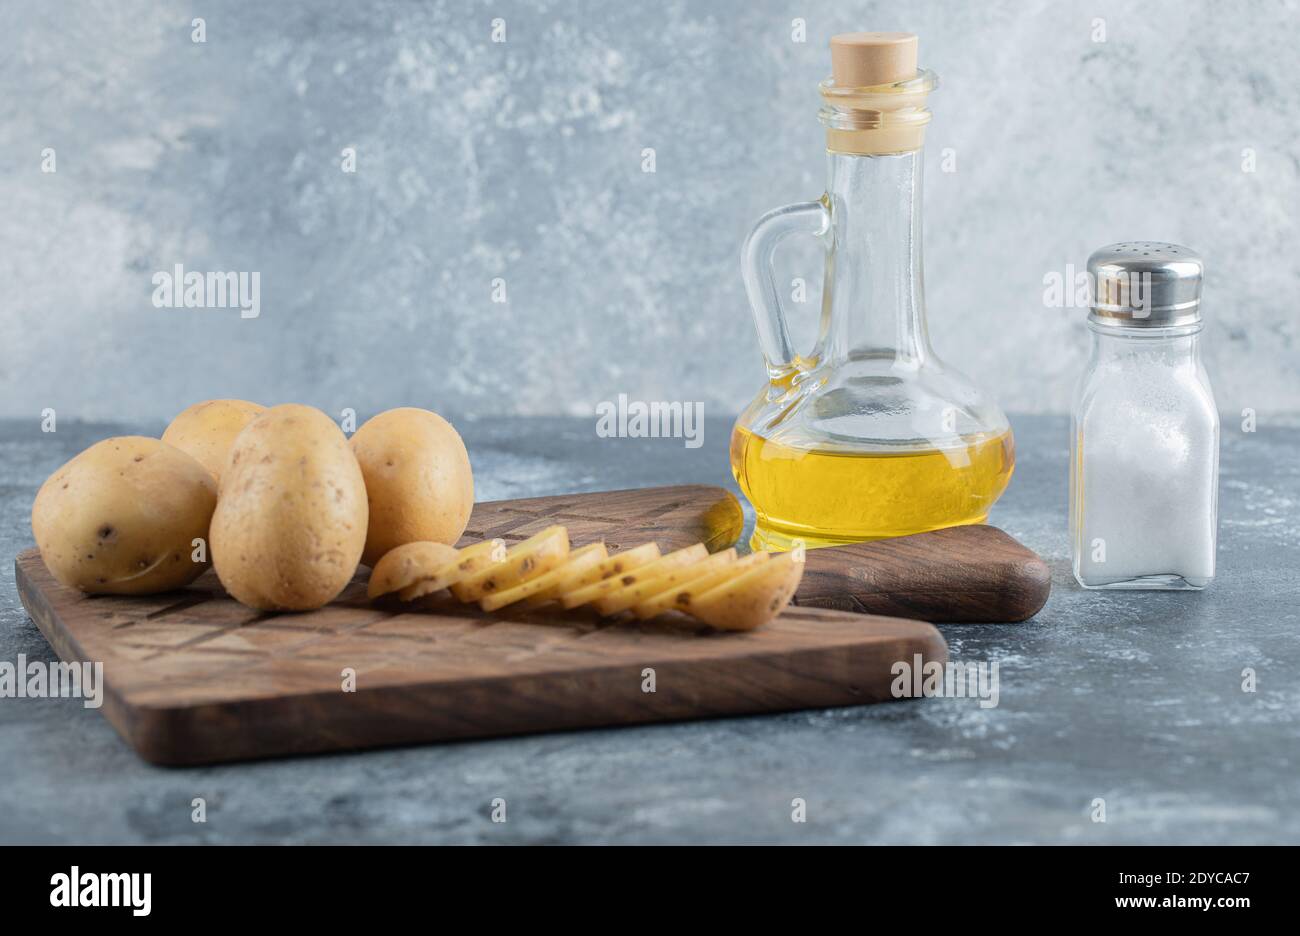 Sliced and whole potatoes on the cutting board with oil and salt Stock Photo